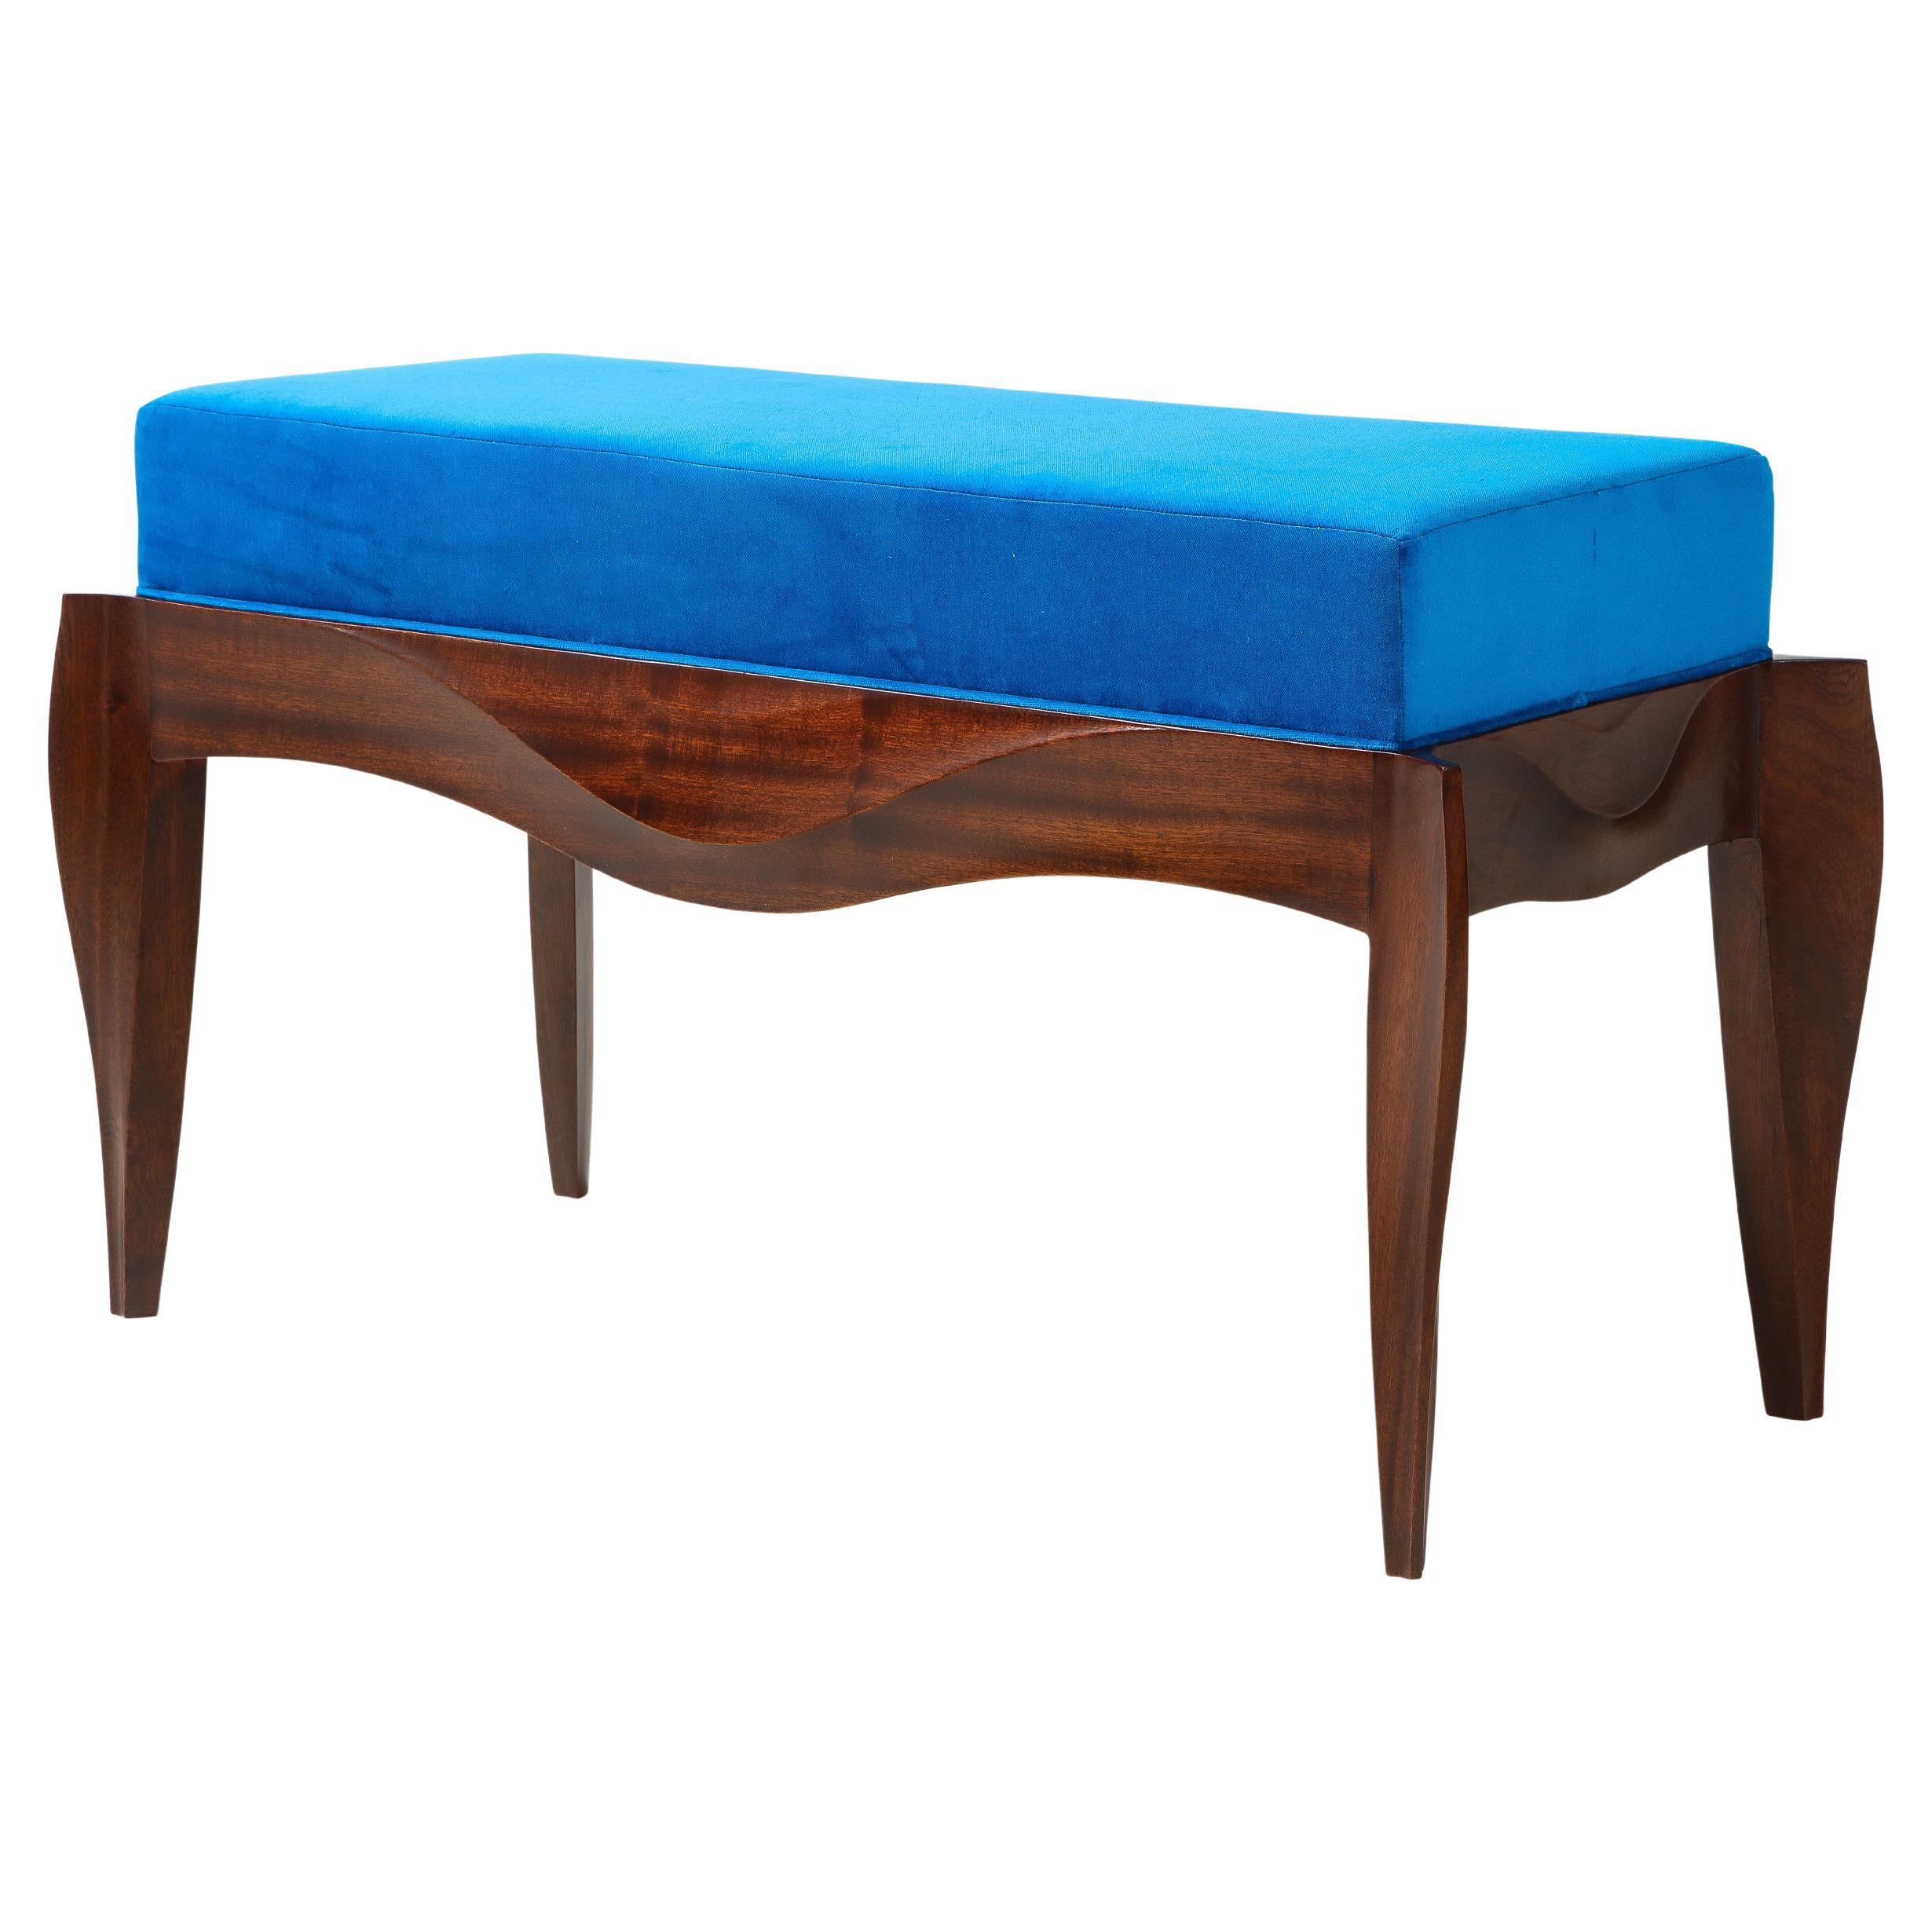 "Colette" Art Deco Style Bench by Roman Erlikh For Sale